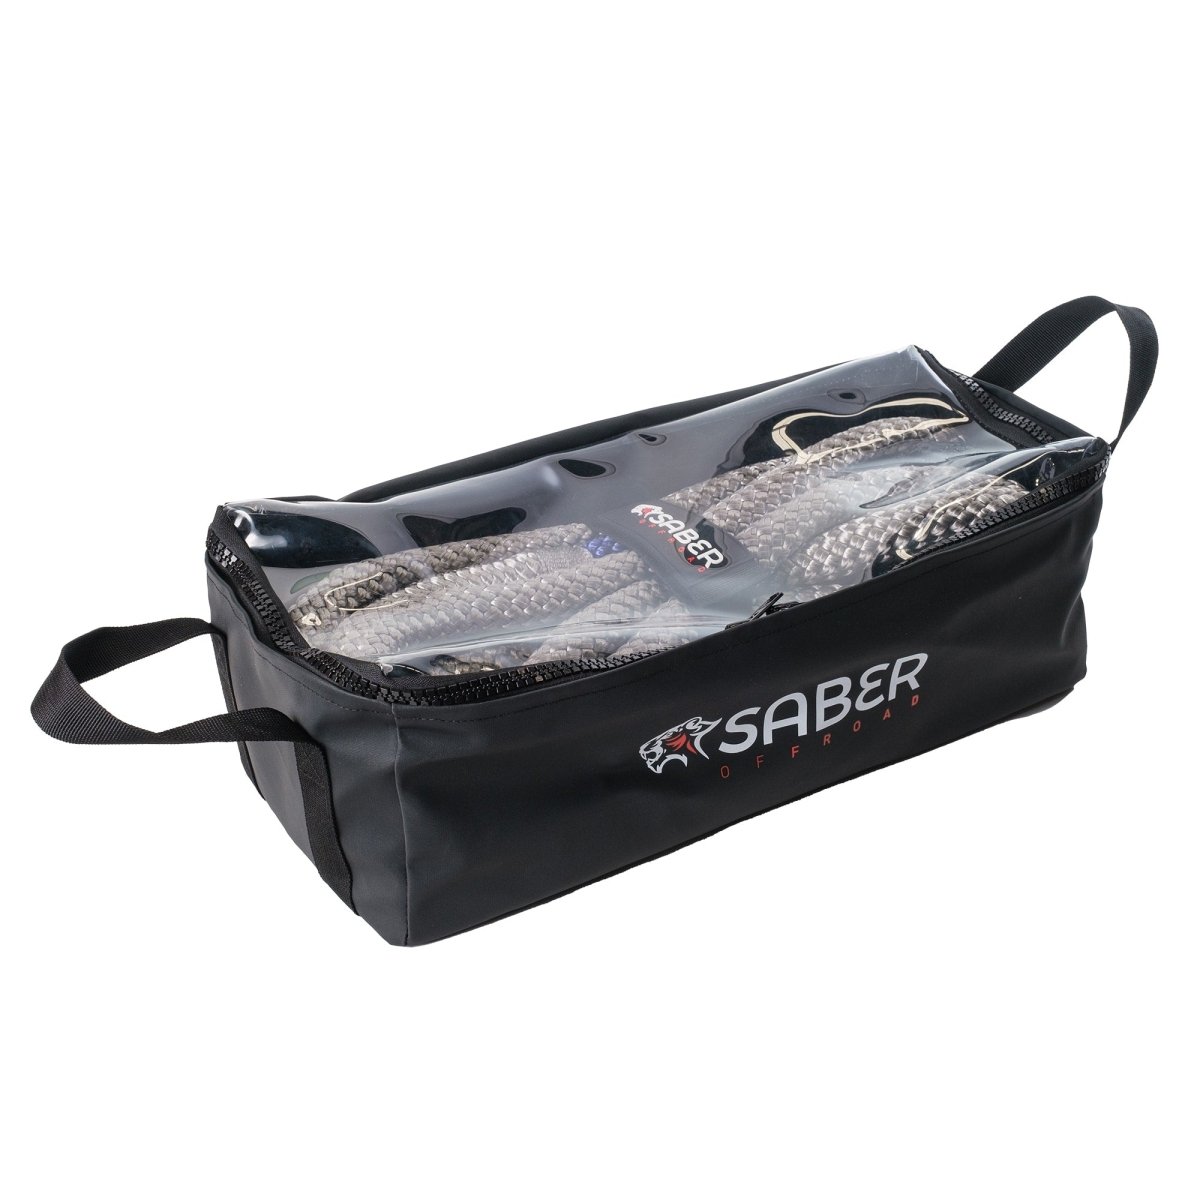 Saber Recovery Gear Bag - Large | Saber Offroad | A247 Gear